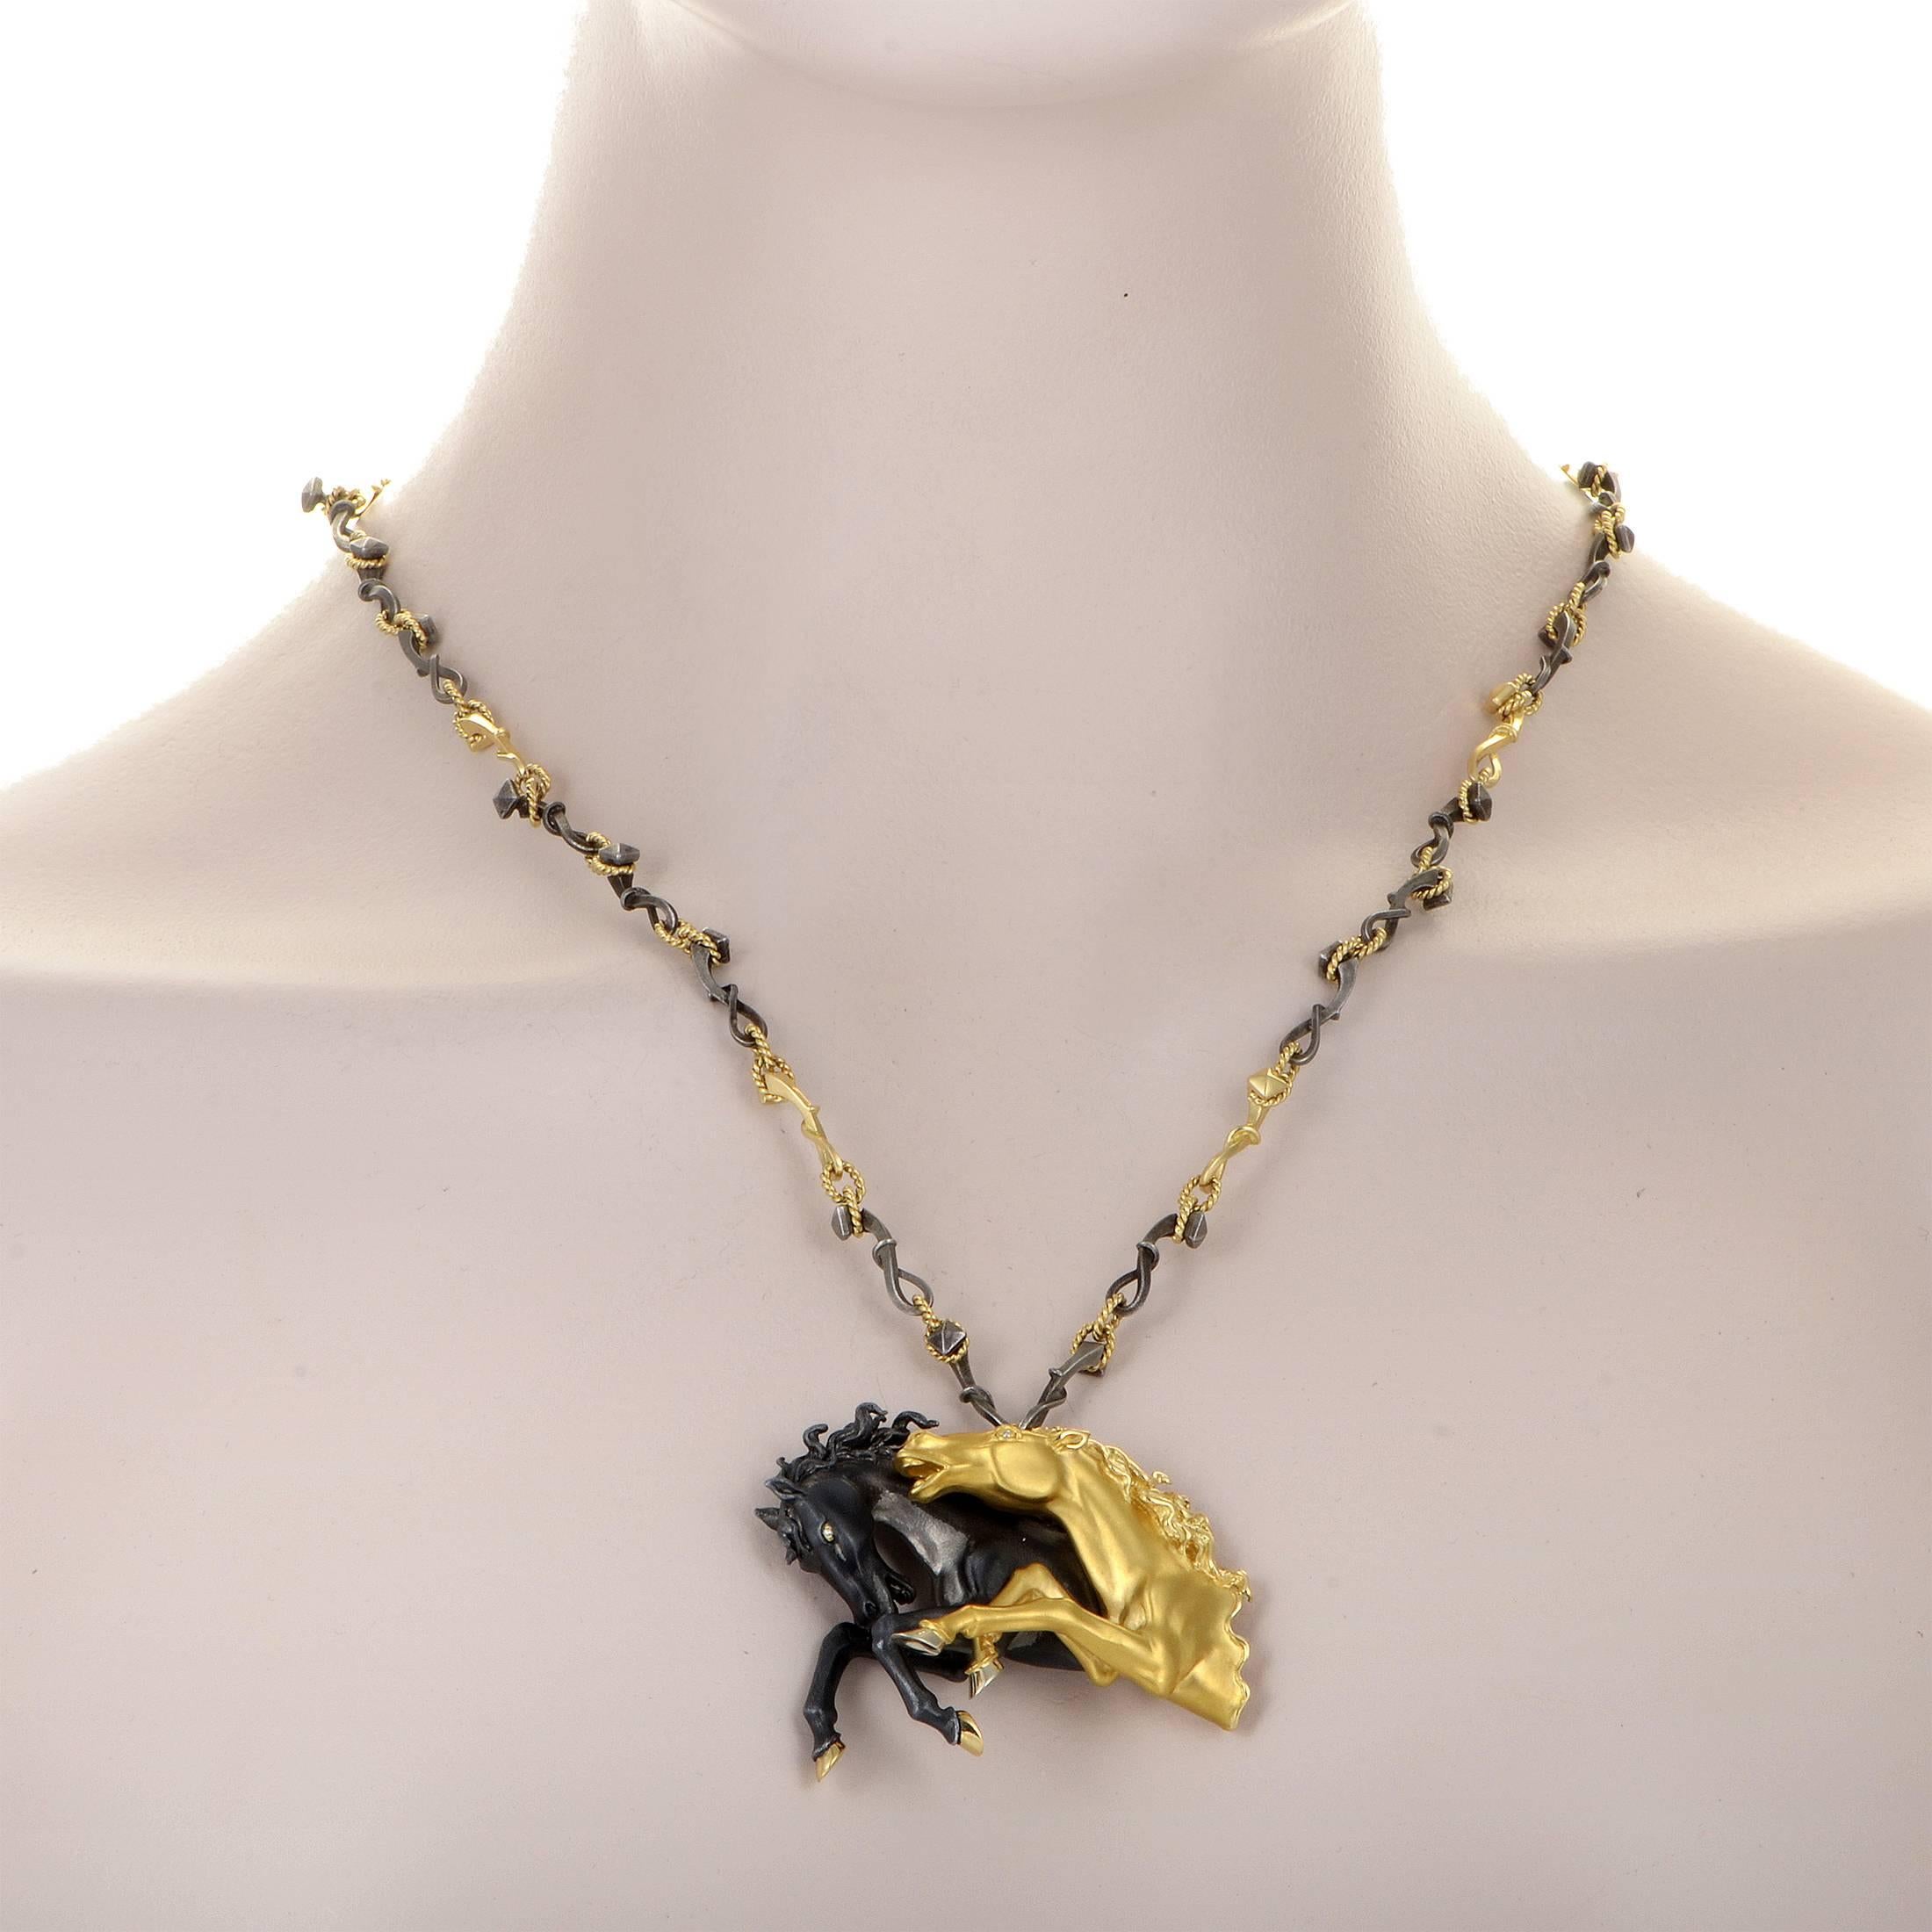 Brilliantly capturing the majestic beauty of horses in a design that astonishes with its exquisitely realistic nature, Carrera y Carrera present this amazing necklace which employs the fantastic contrast between exuberant 18K yellow gold and black